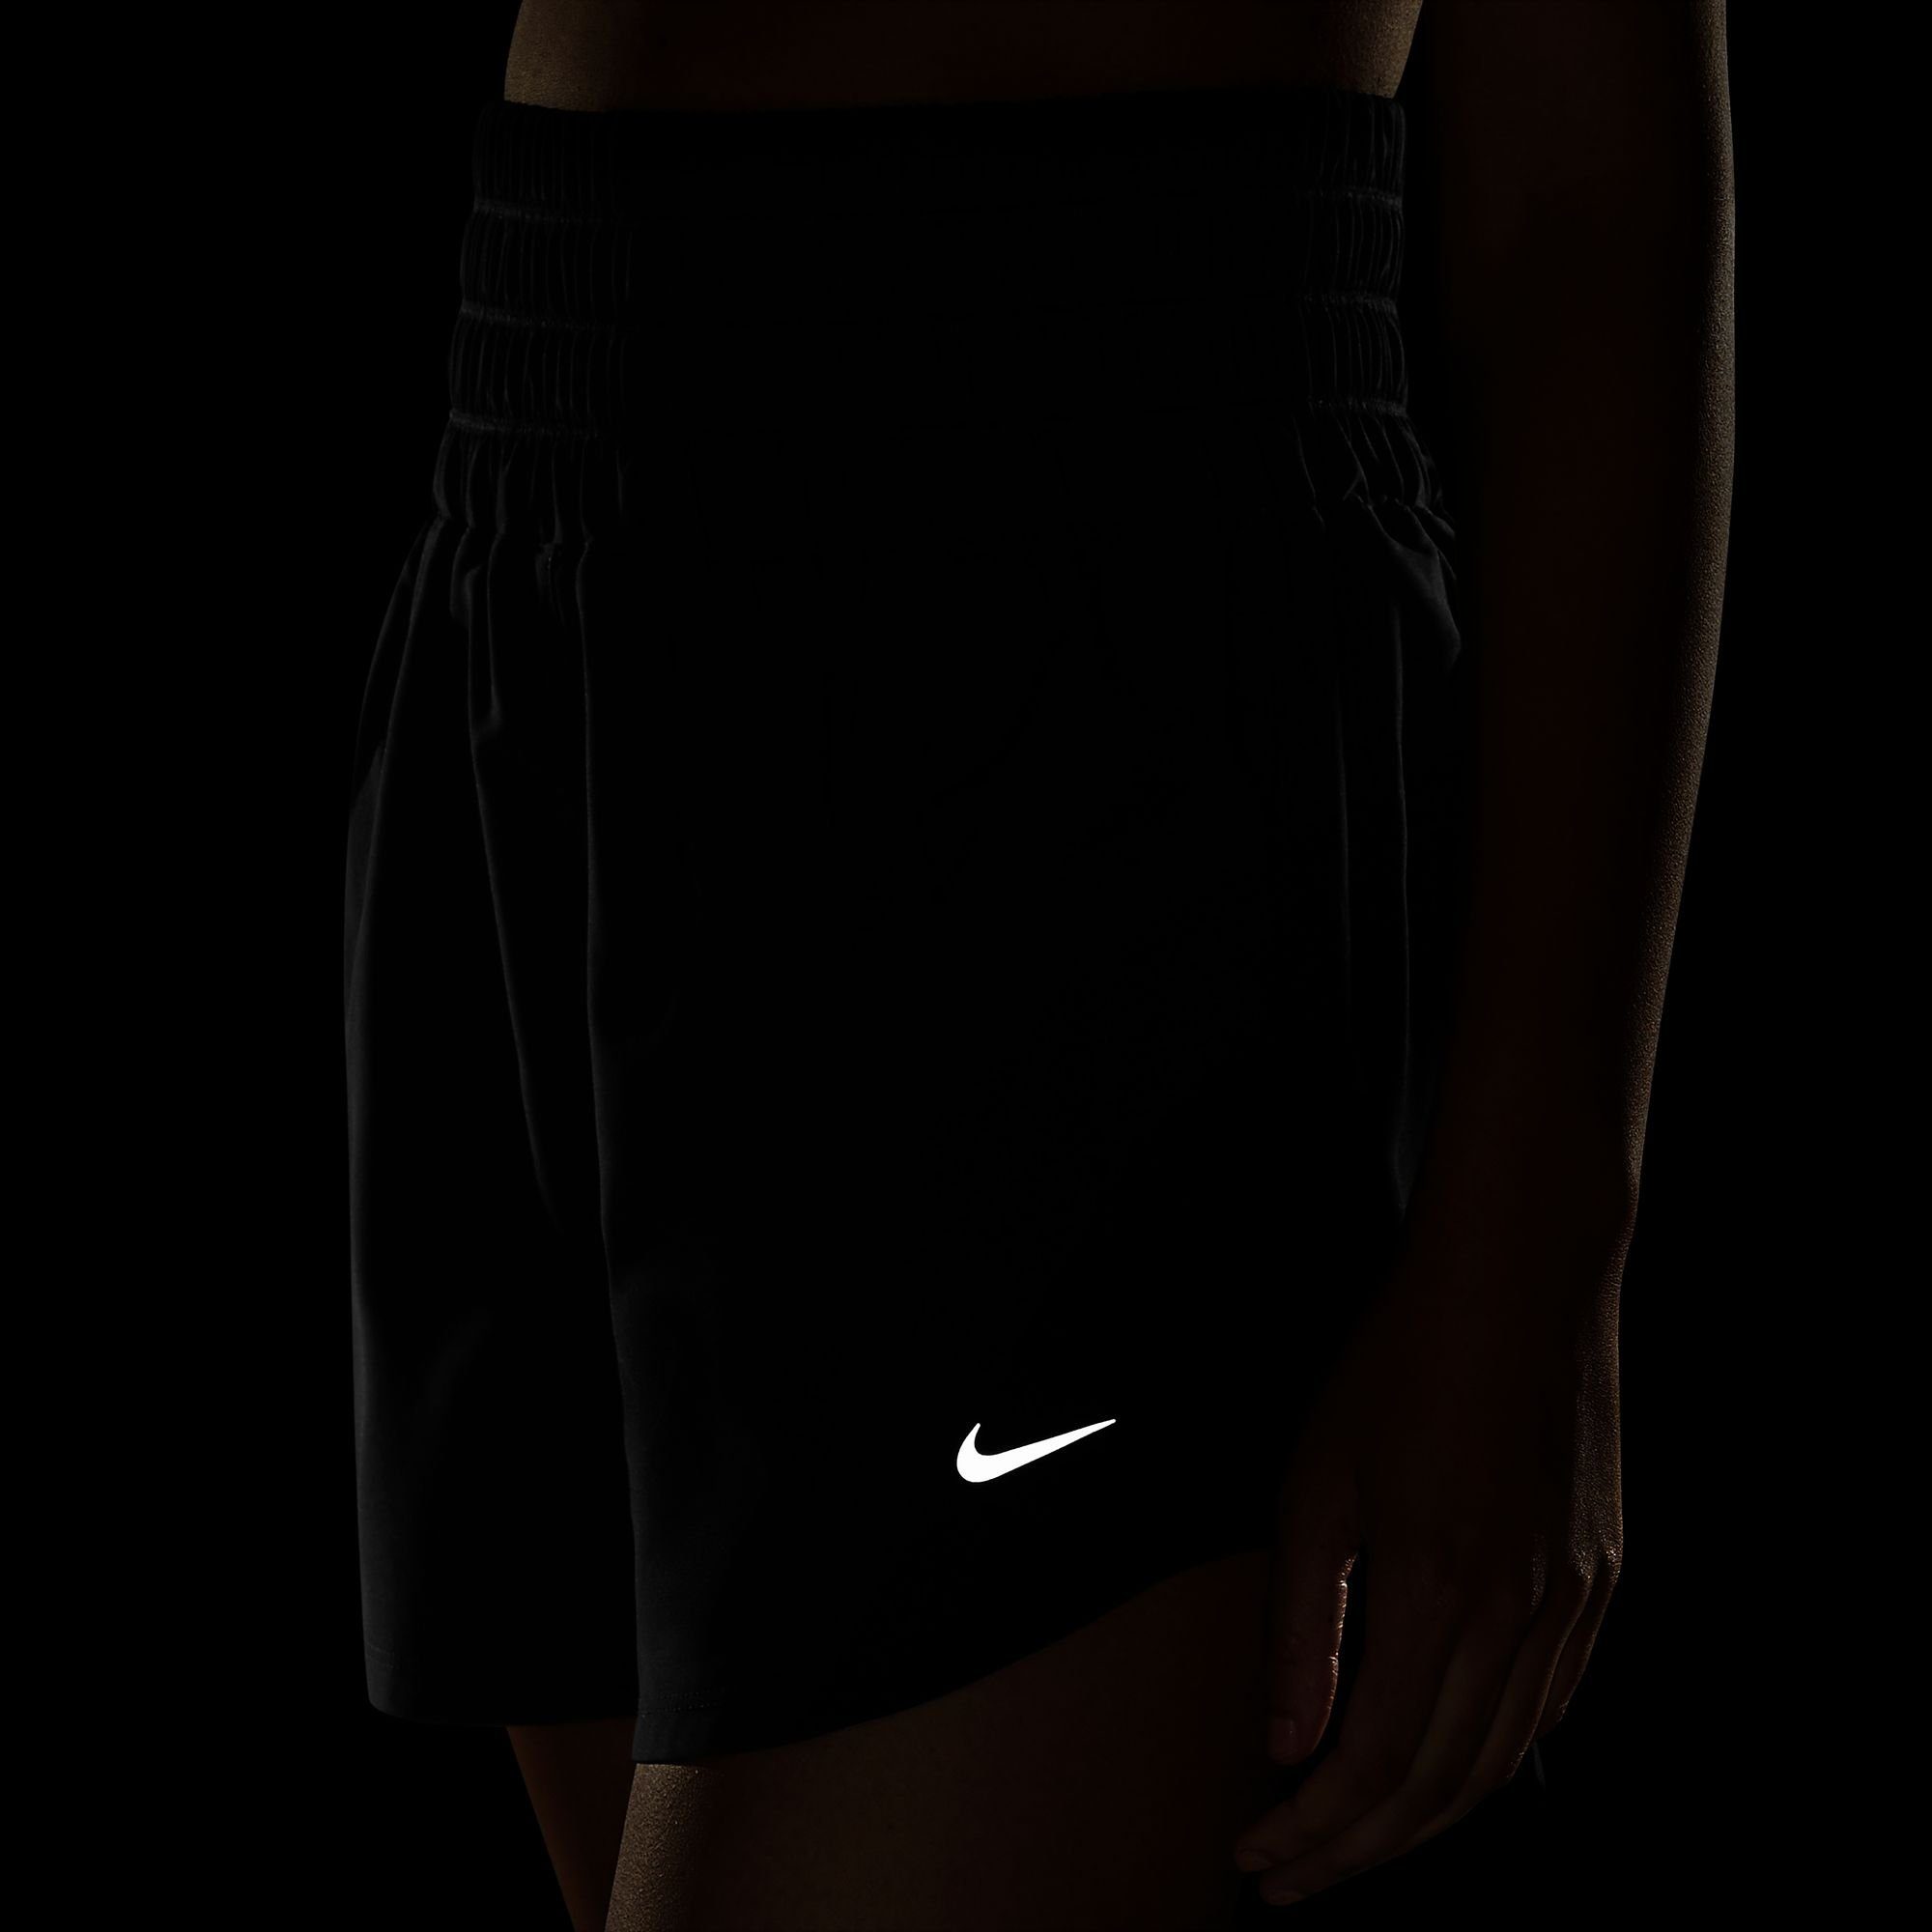 DRI-FIT Nike HIGH-WAISTED ULTRA SHORTS Trainingsshorts WOMEN'S BRIEF-LINED ONE